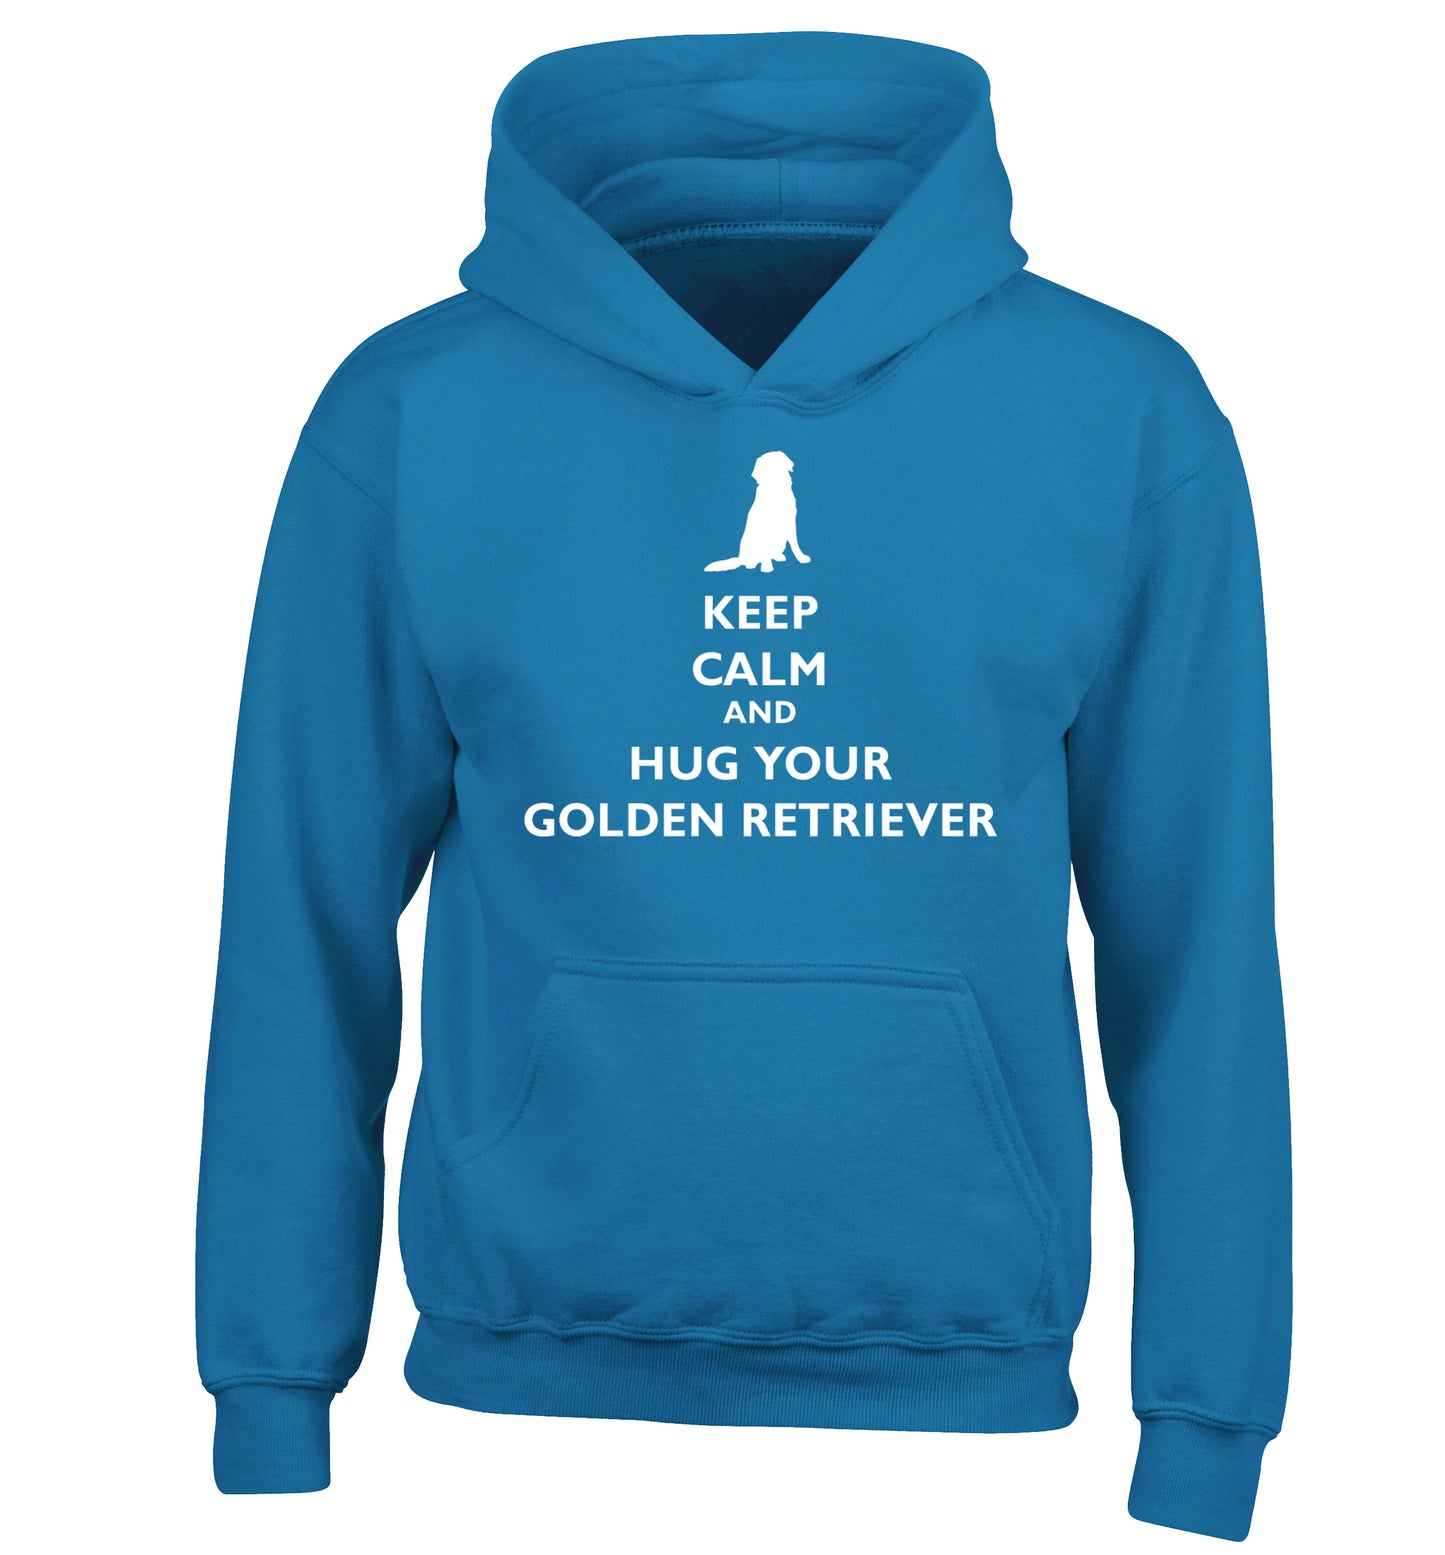 Keep calm and hug your golden retriever children's blue hoodie 12-13 Years